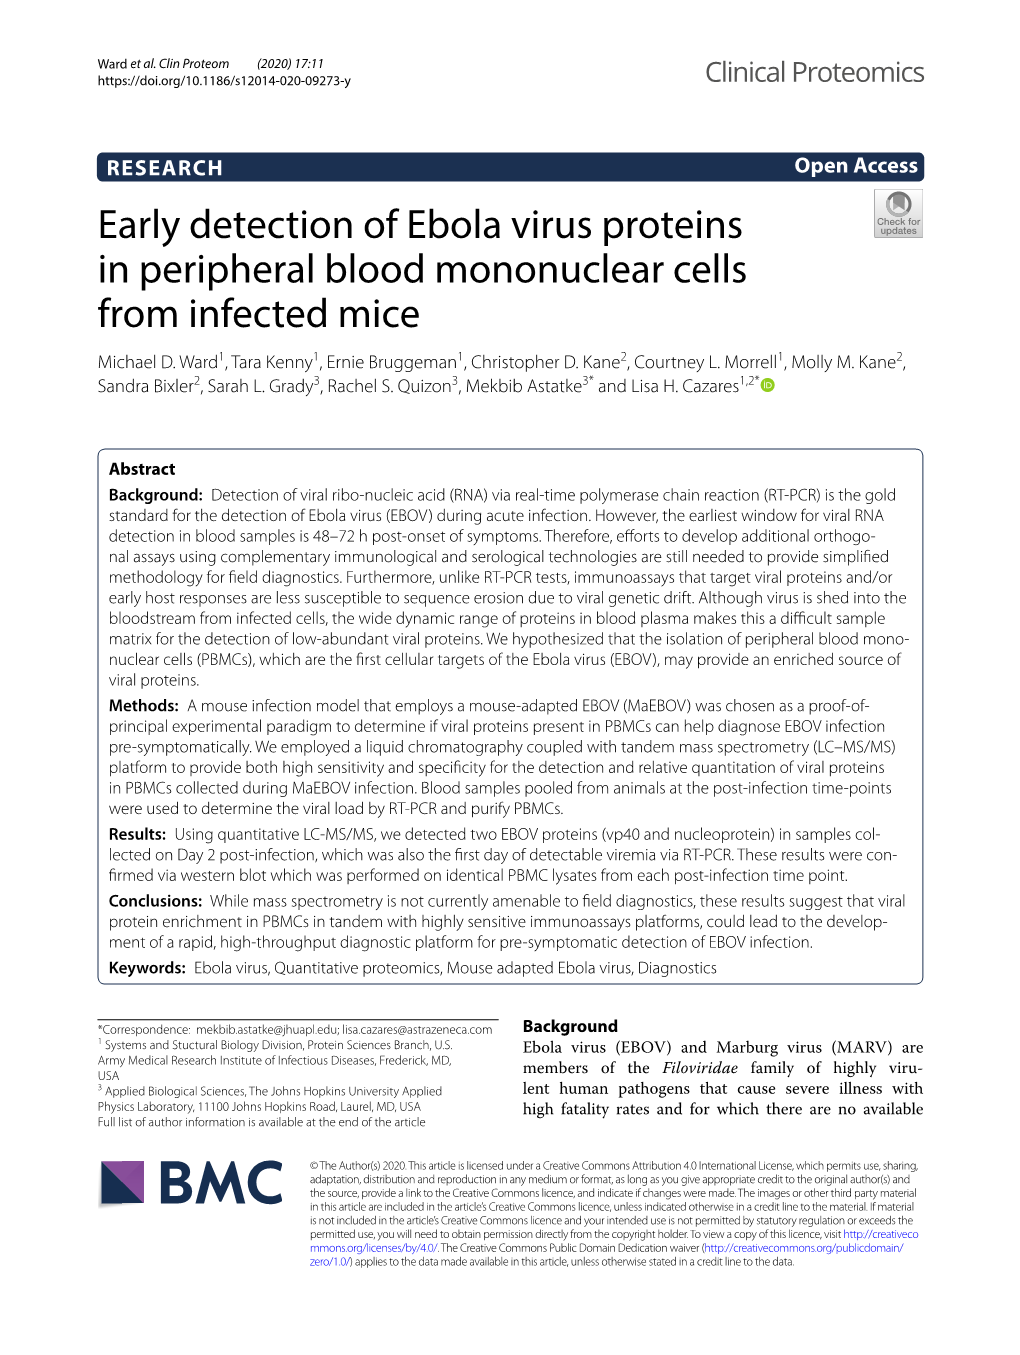 Early Detection of Ebola Virus Proteins in Peripheral Blood Mononuclear Cells from Infected Mice Michael D